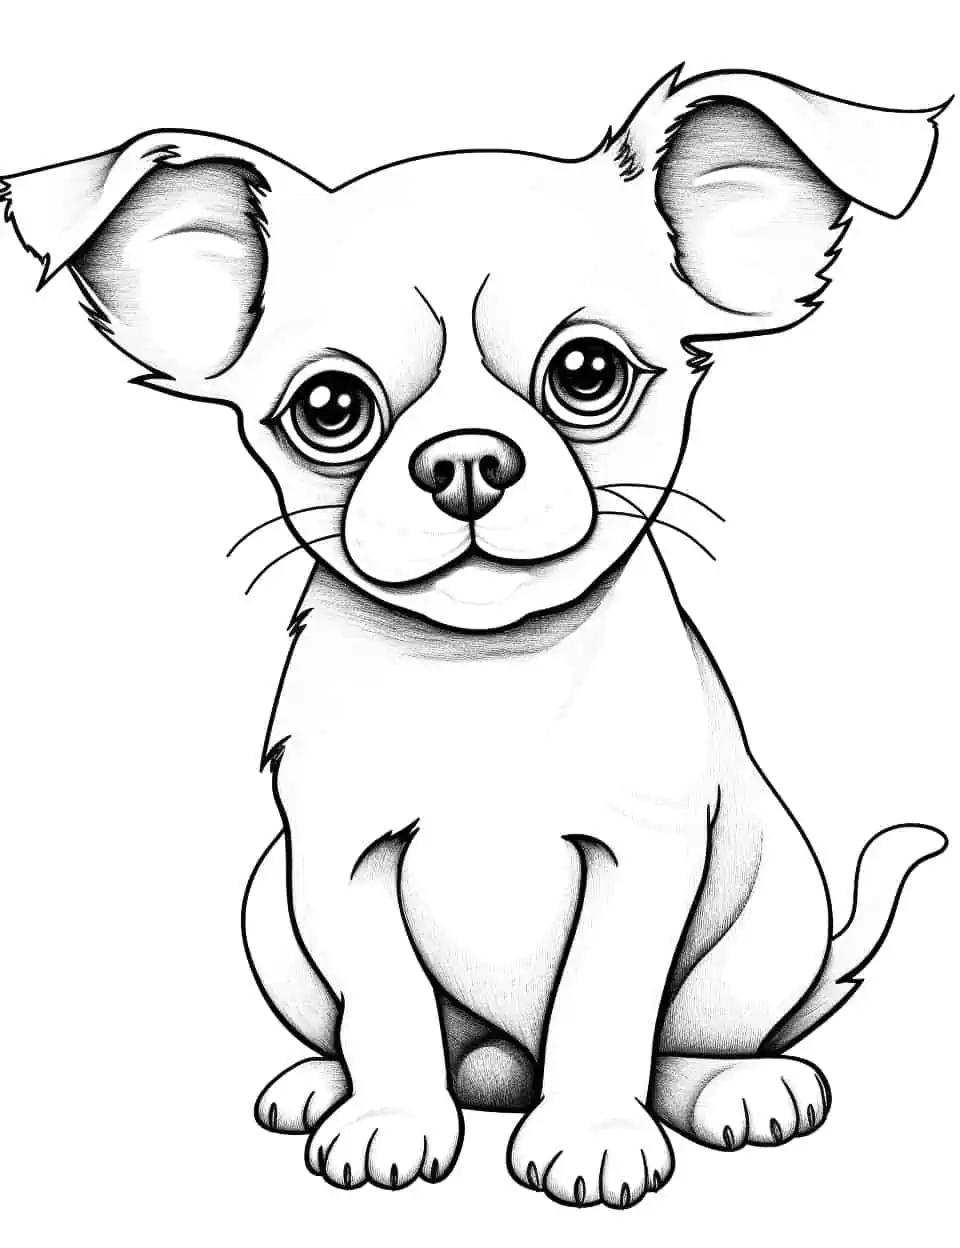 Dog Drawing of a Chihuahua Coloring Page - A lively dog drawing of a Chihuahua for kids to color and bring to life.